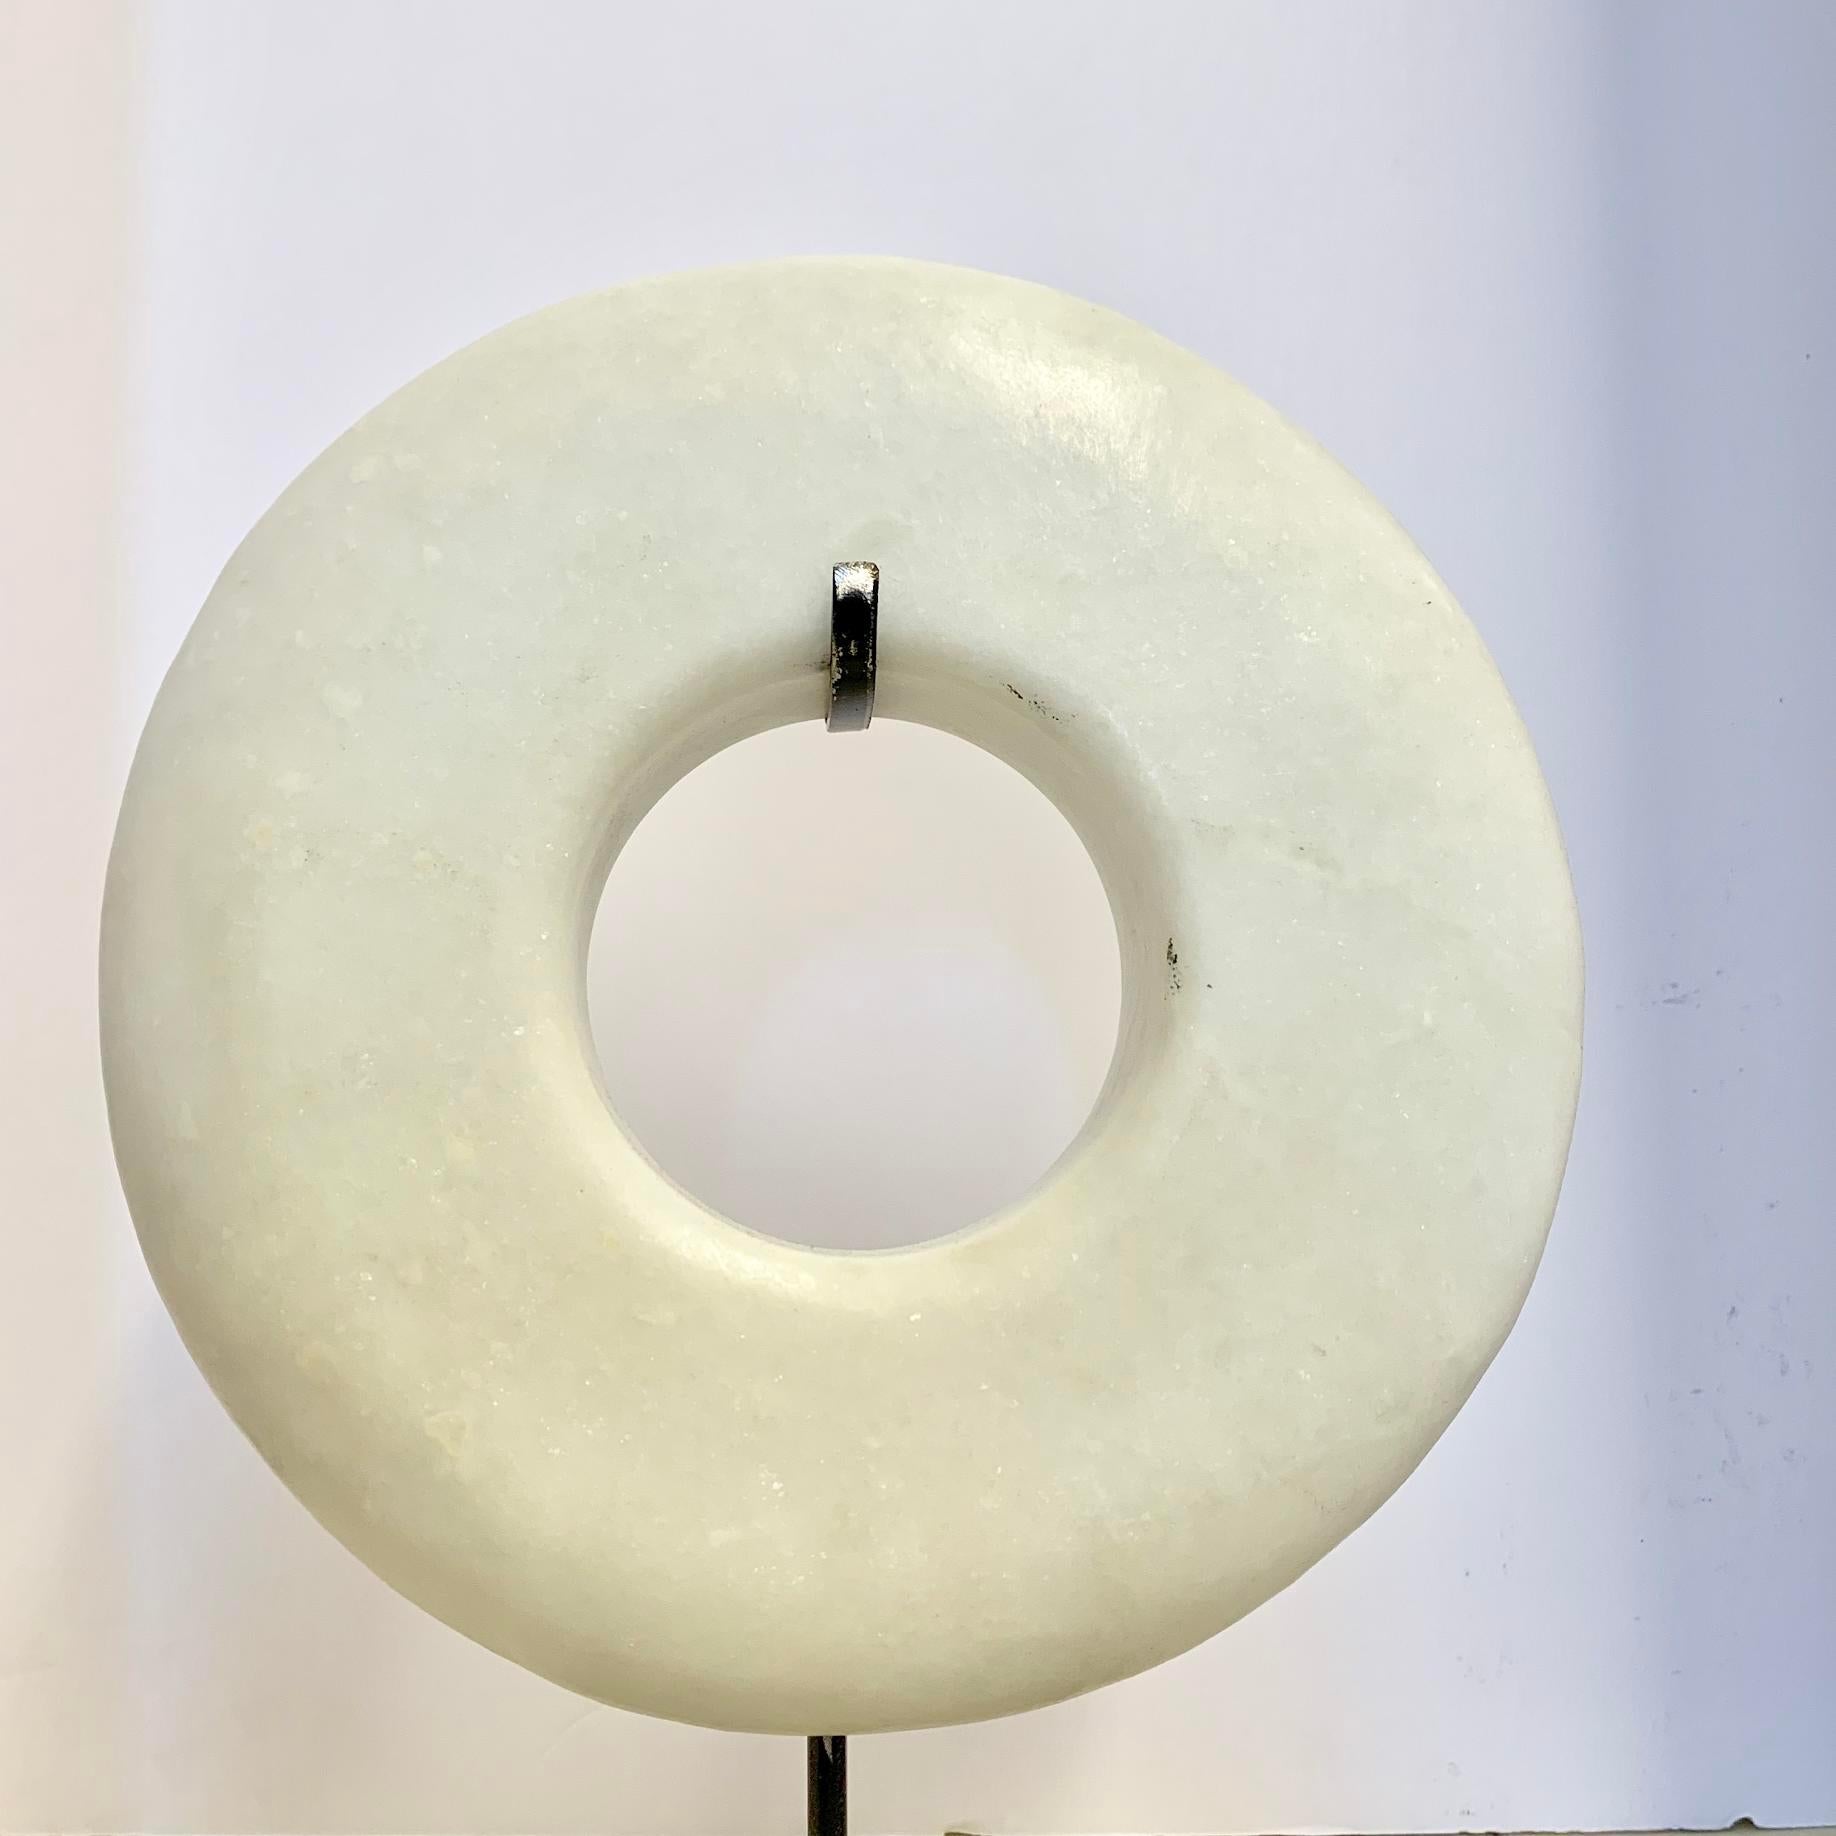 Contemporary thick white stone ring sculpture on metal stand.
Stand measures 6